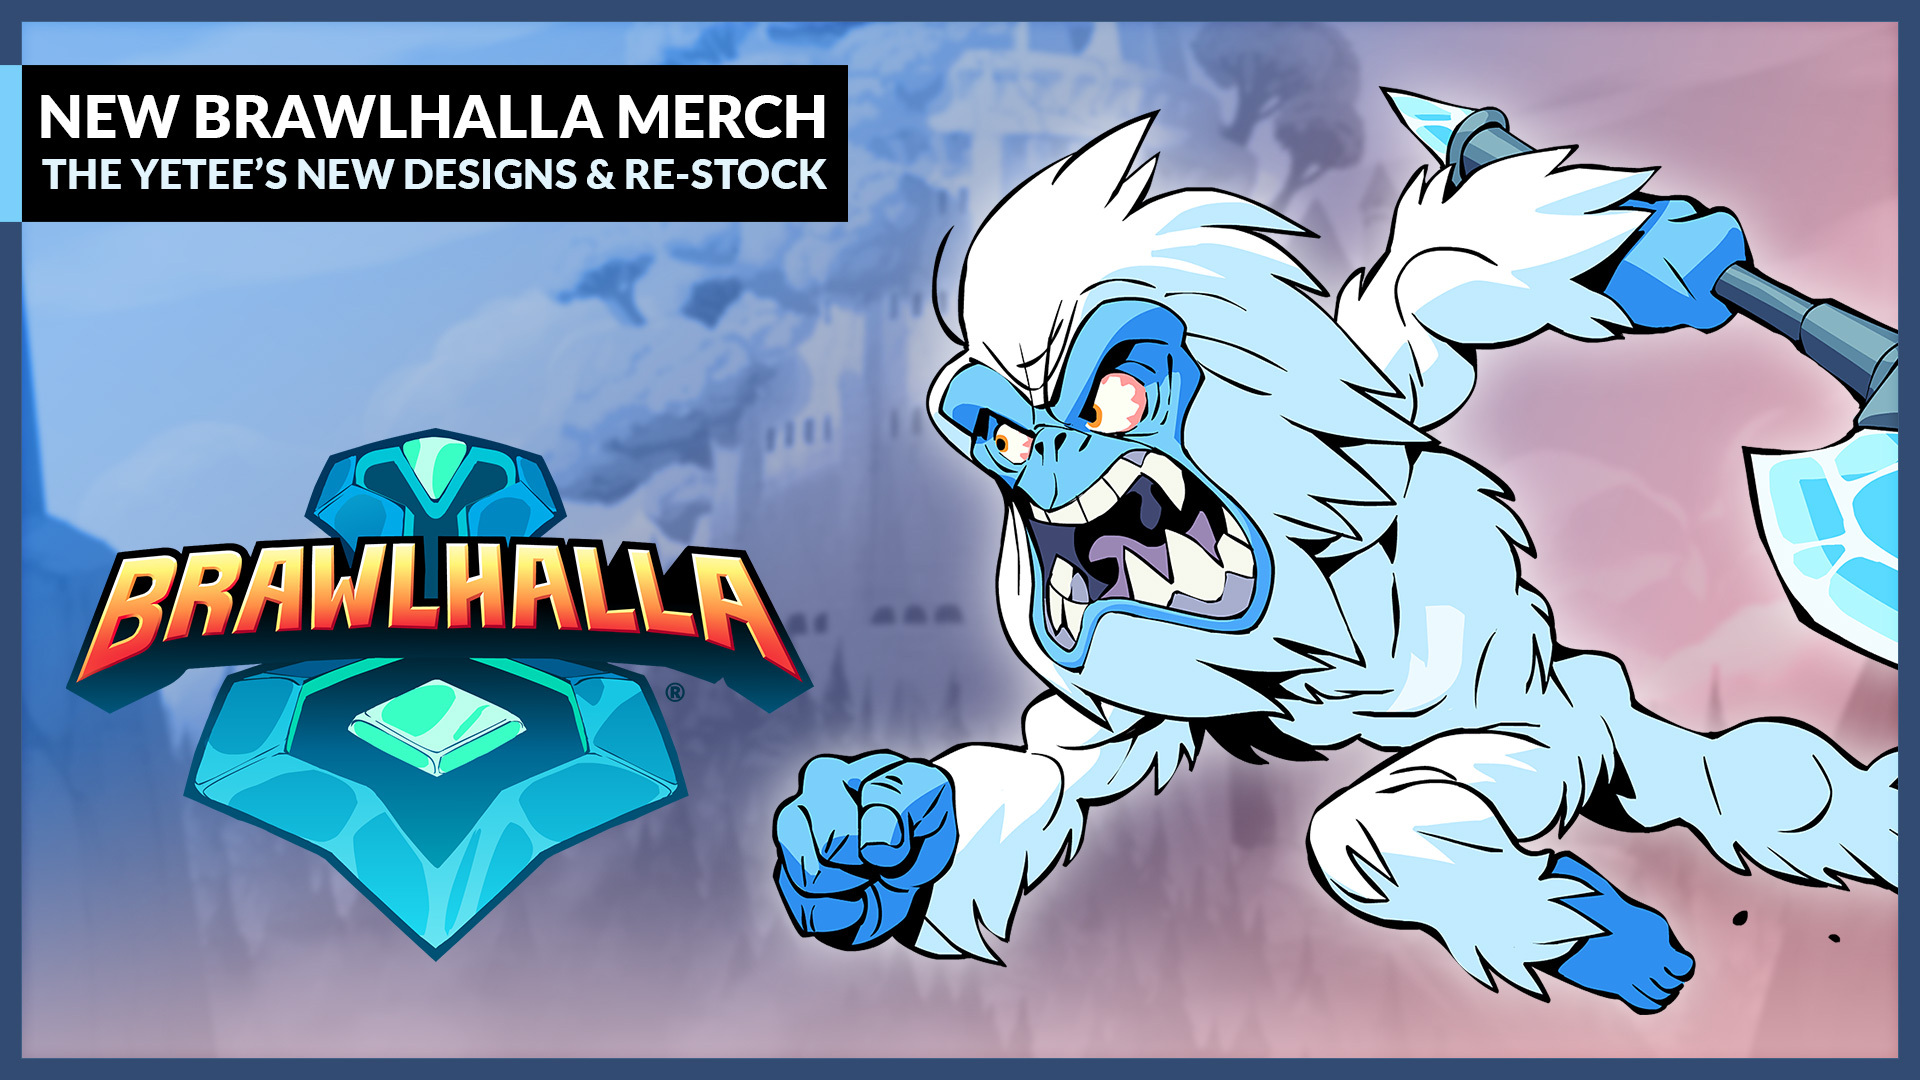 New Brawlhalla merchandise available now!